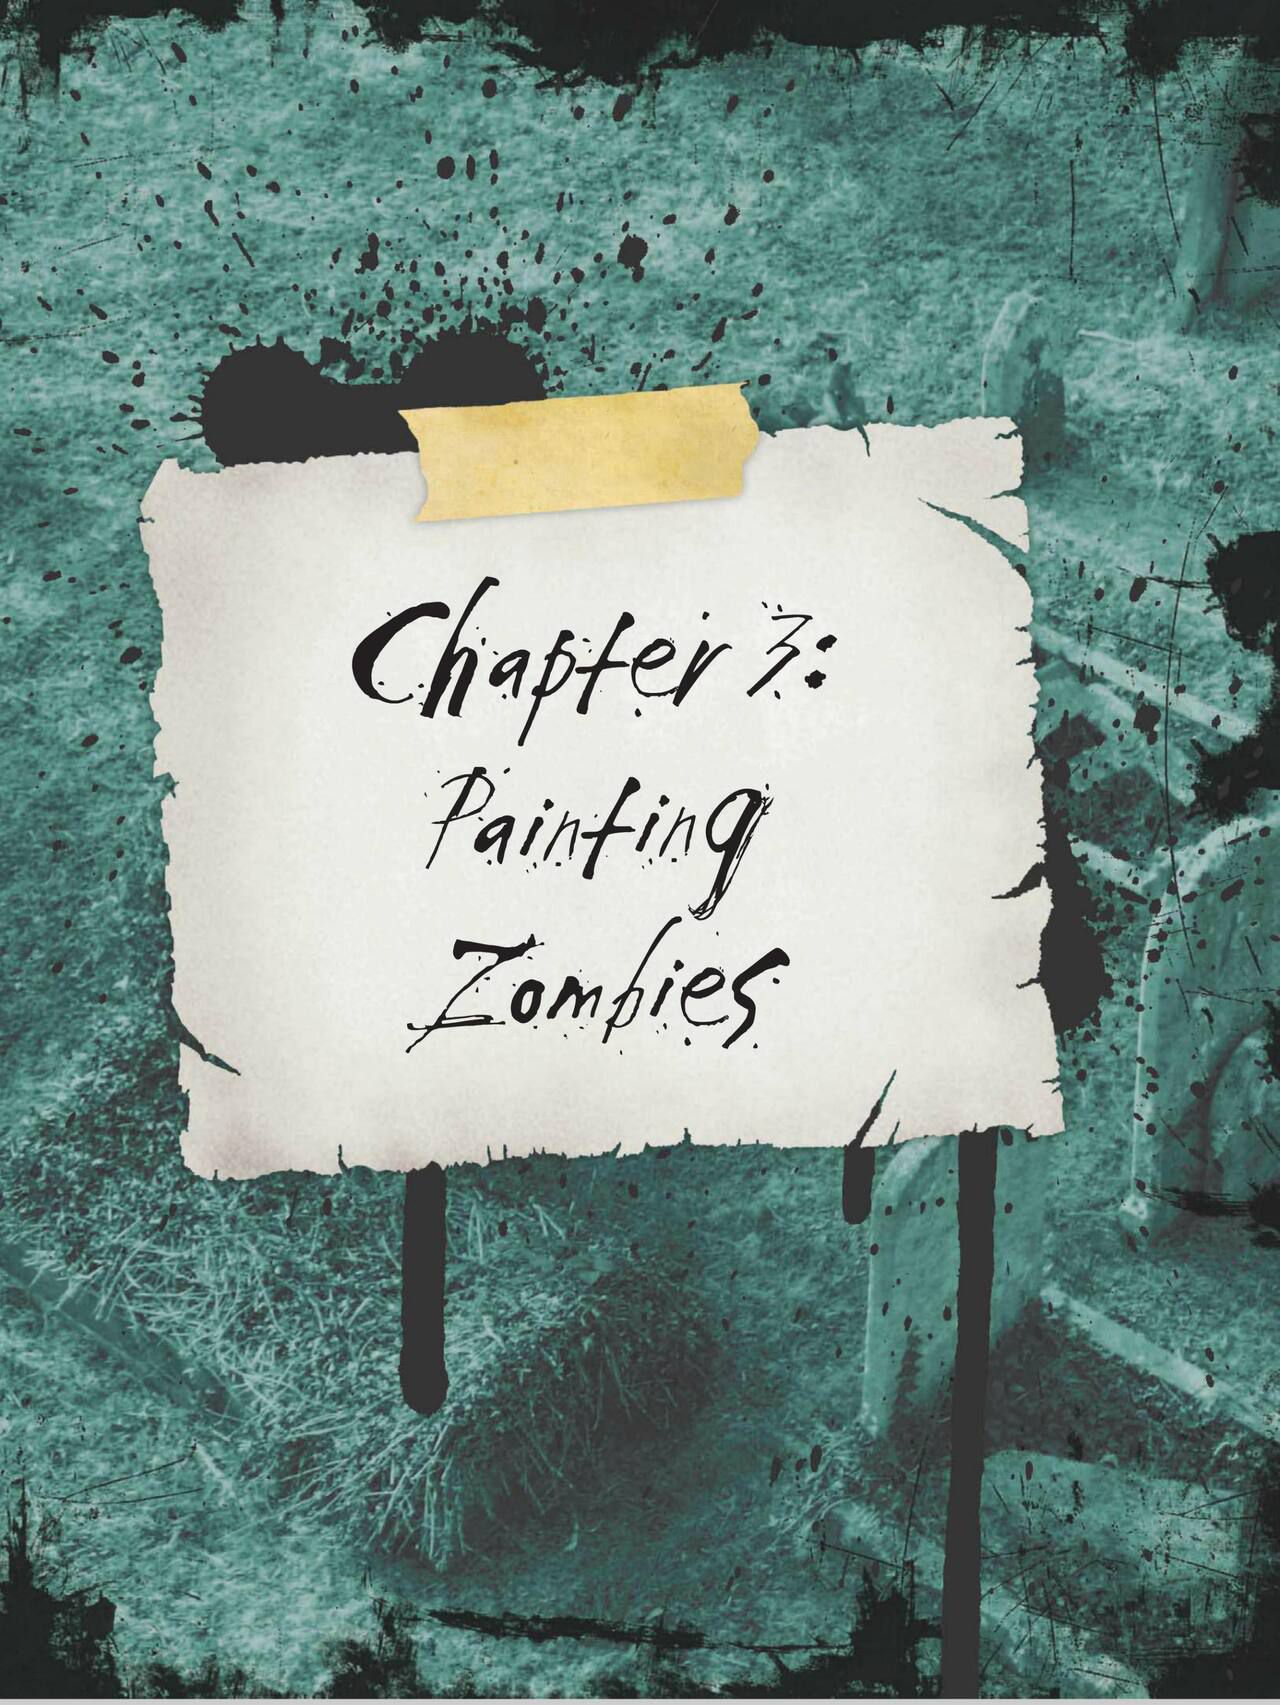 How to Draw Zombies: Discover the secrets to drawing, painting, and illustrating the undead 僵尸描绘集 64